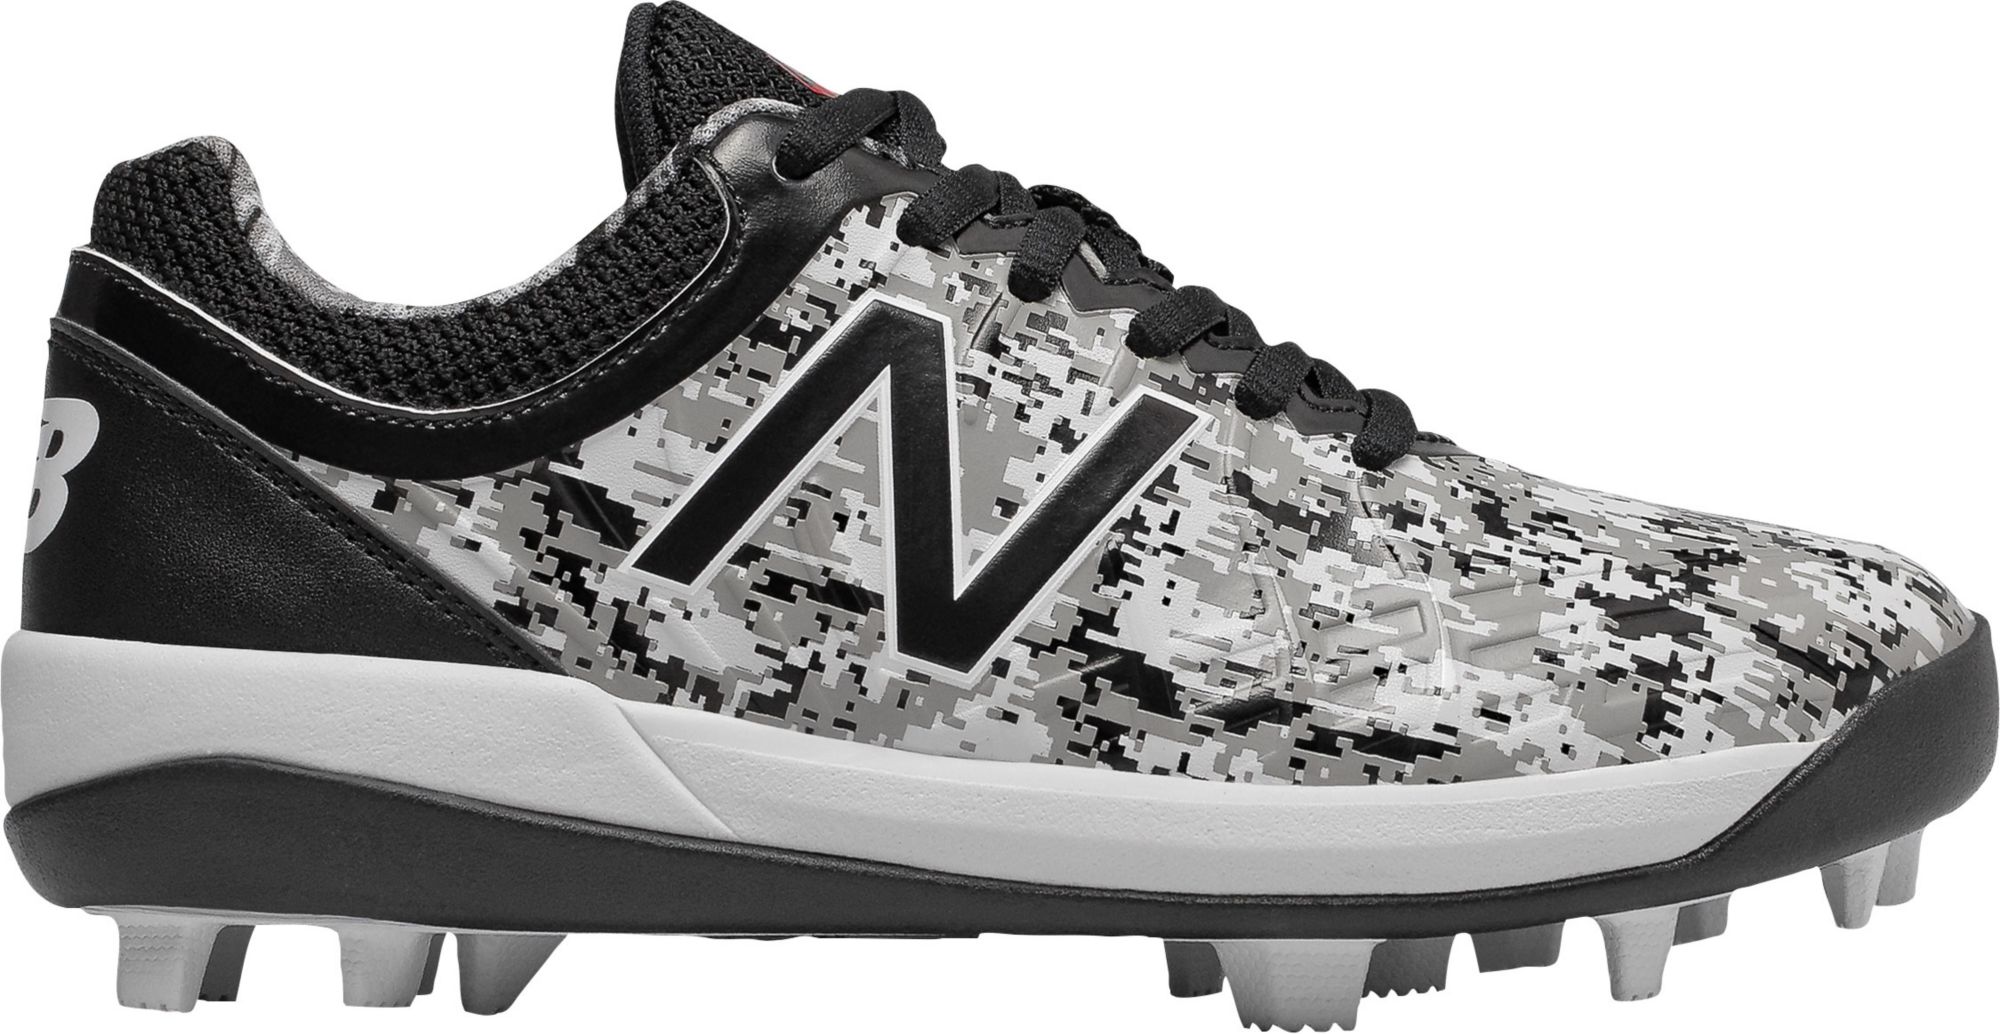 black and gold youth baseball cleats